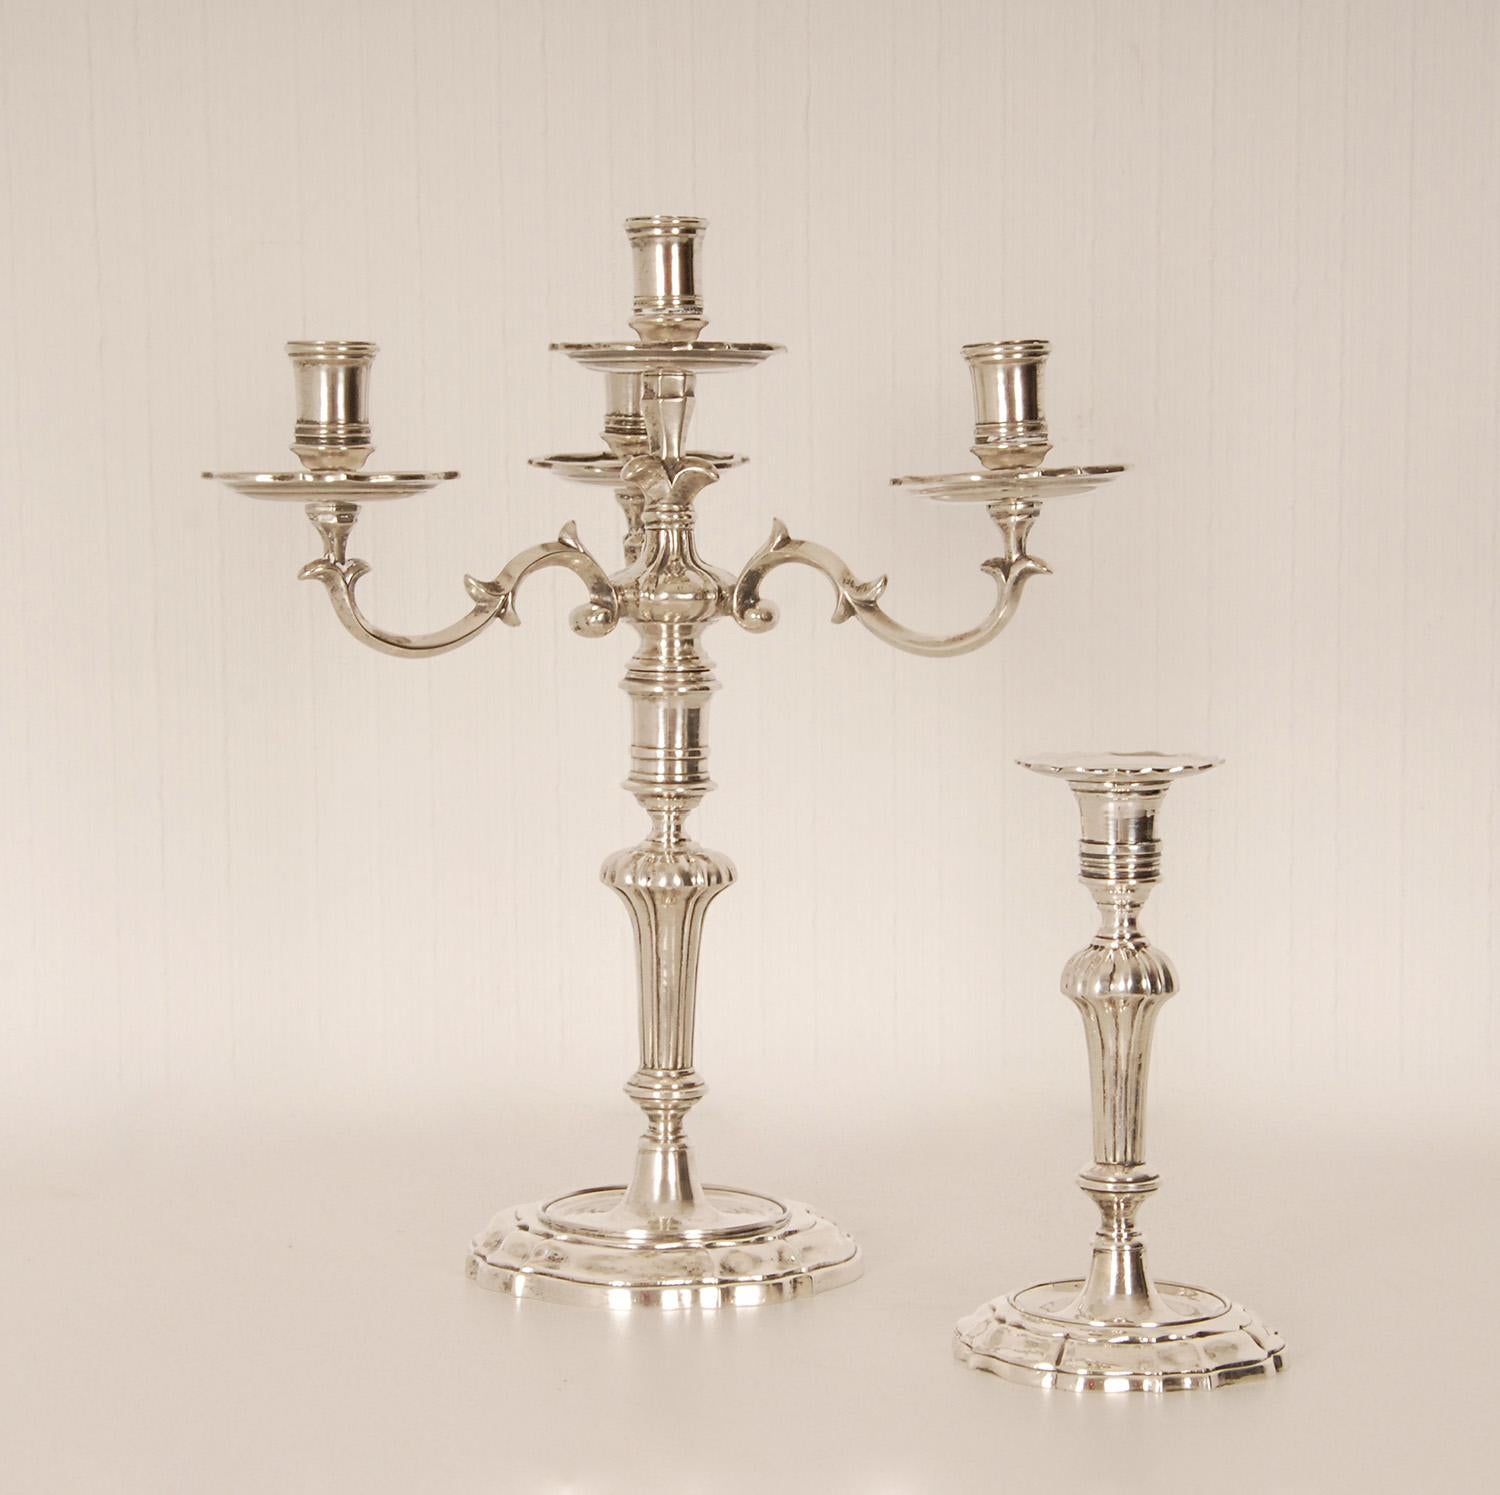 18th Century Italian Candelabra Rococo Sterling Silver Candlesticks Venice pair For Sale 4